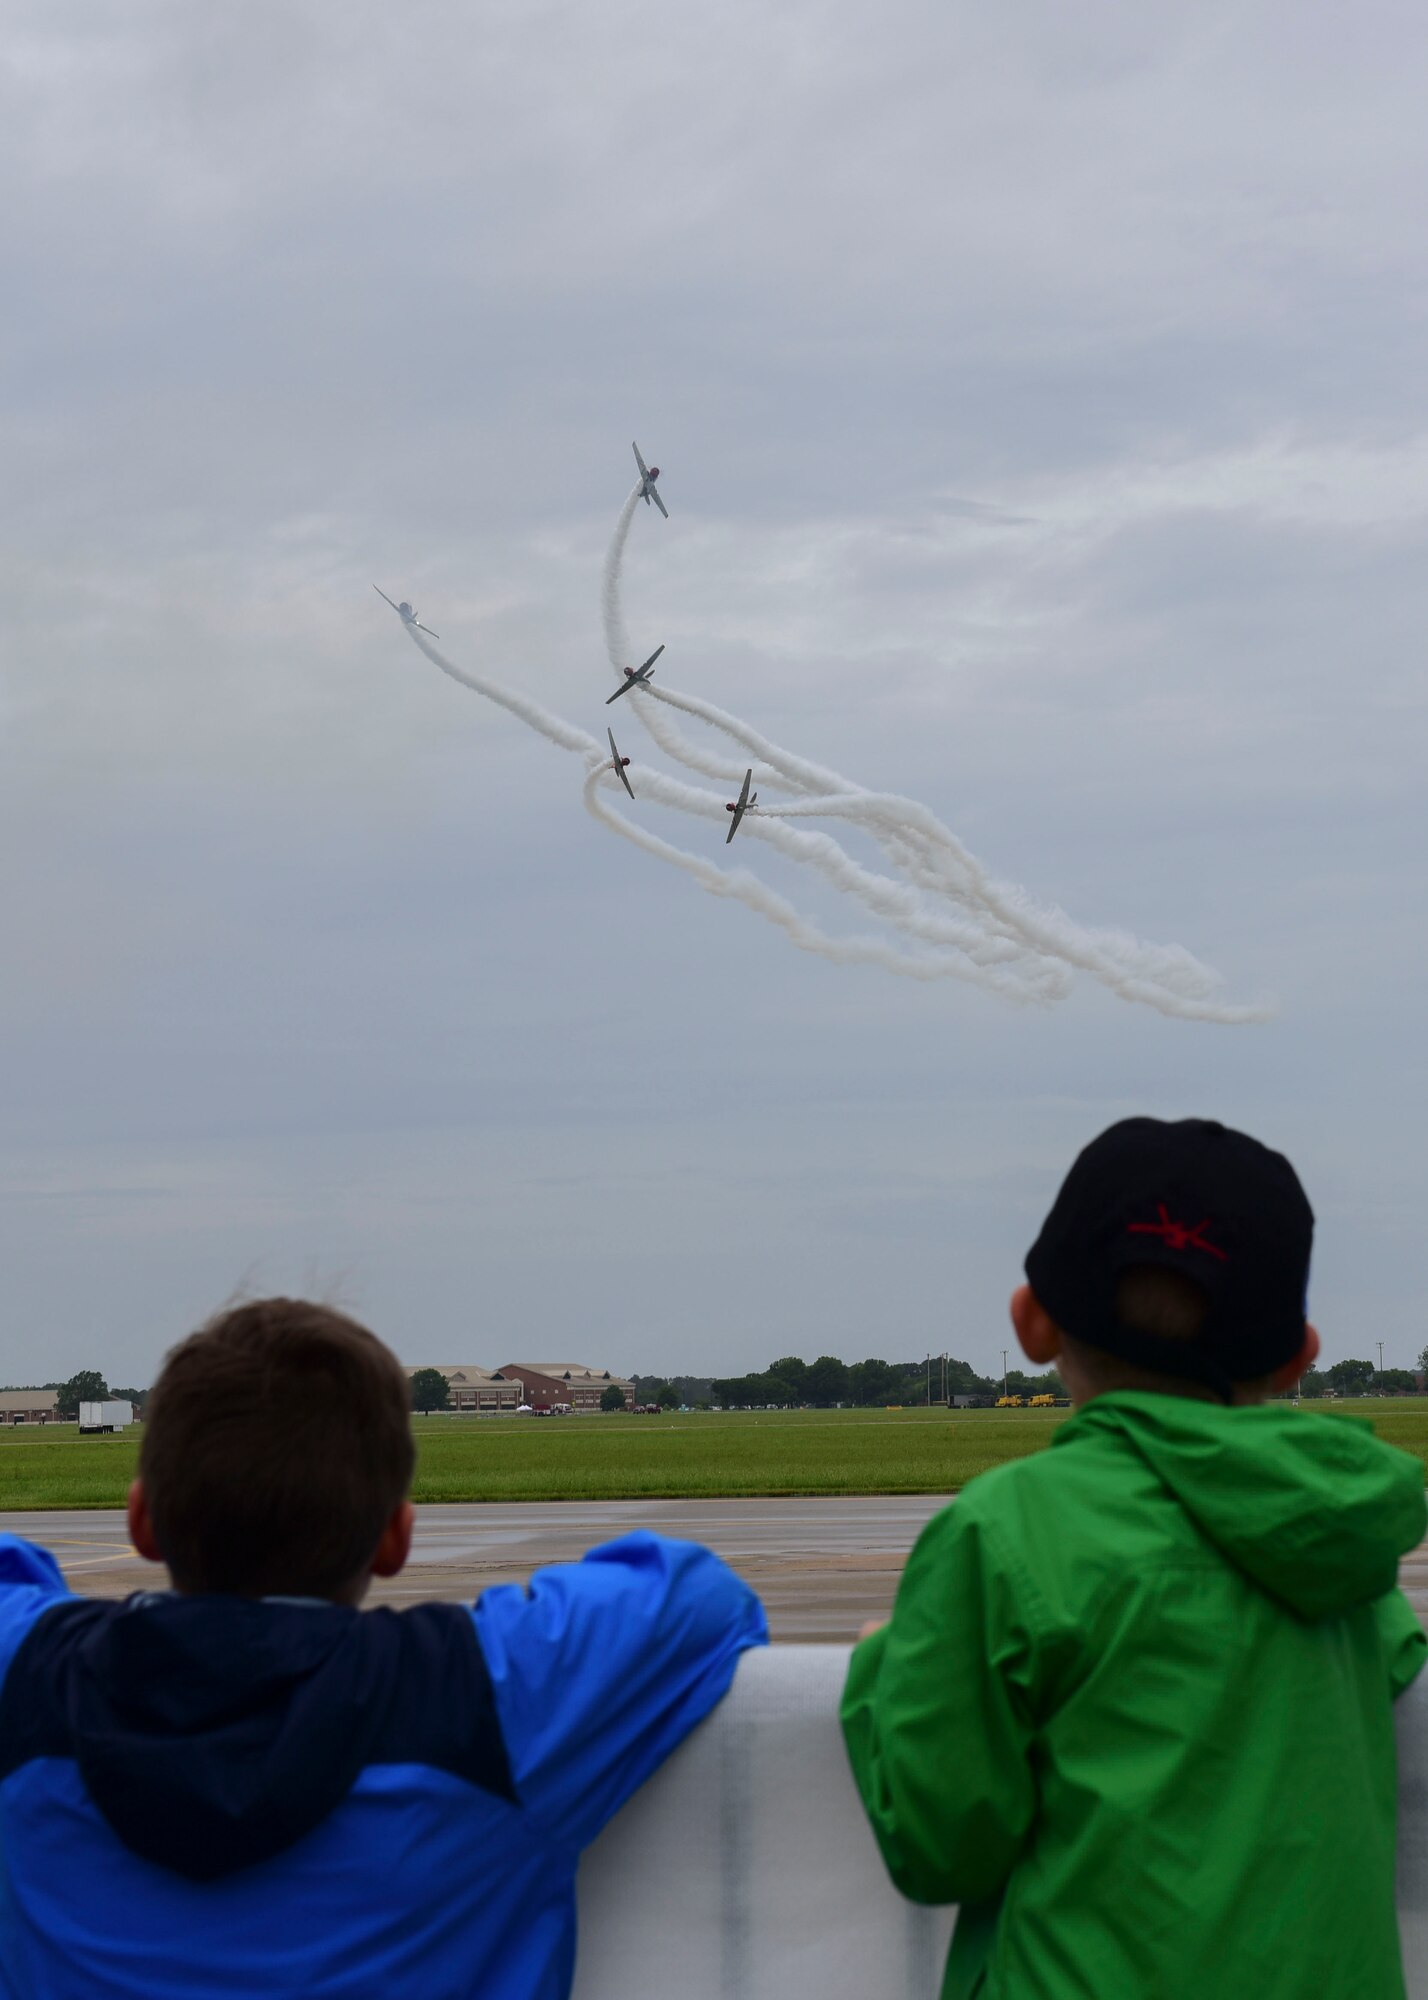 Children watch the Geico Skytypers perform during the AirPower Over Hampton Roads JBLE Air and Space Expo at Joint Base Langley-Eustis, Virginia, May 19, 2018. The Geico Skytypers team consists of six vintage U.S. Navy SNJ trainers that display tactical maneuvers used during World War II and the Korean War. (U.S. Air Force photo by Airman 1st Class Monica Roybal)